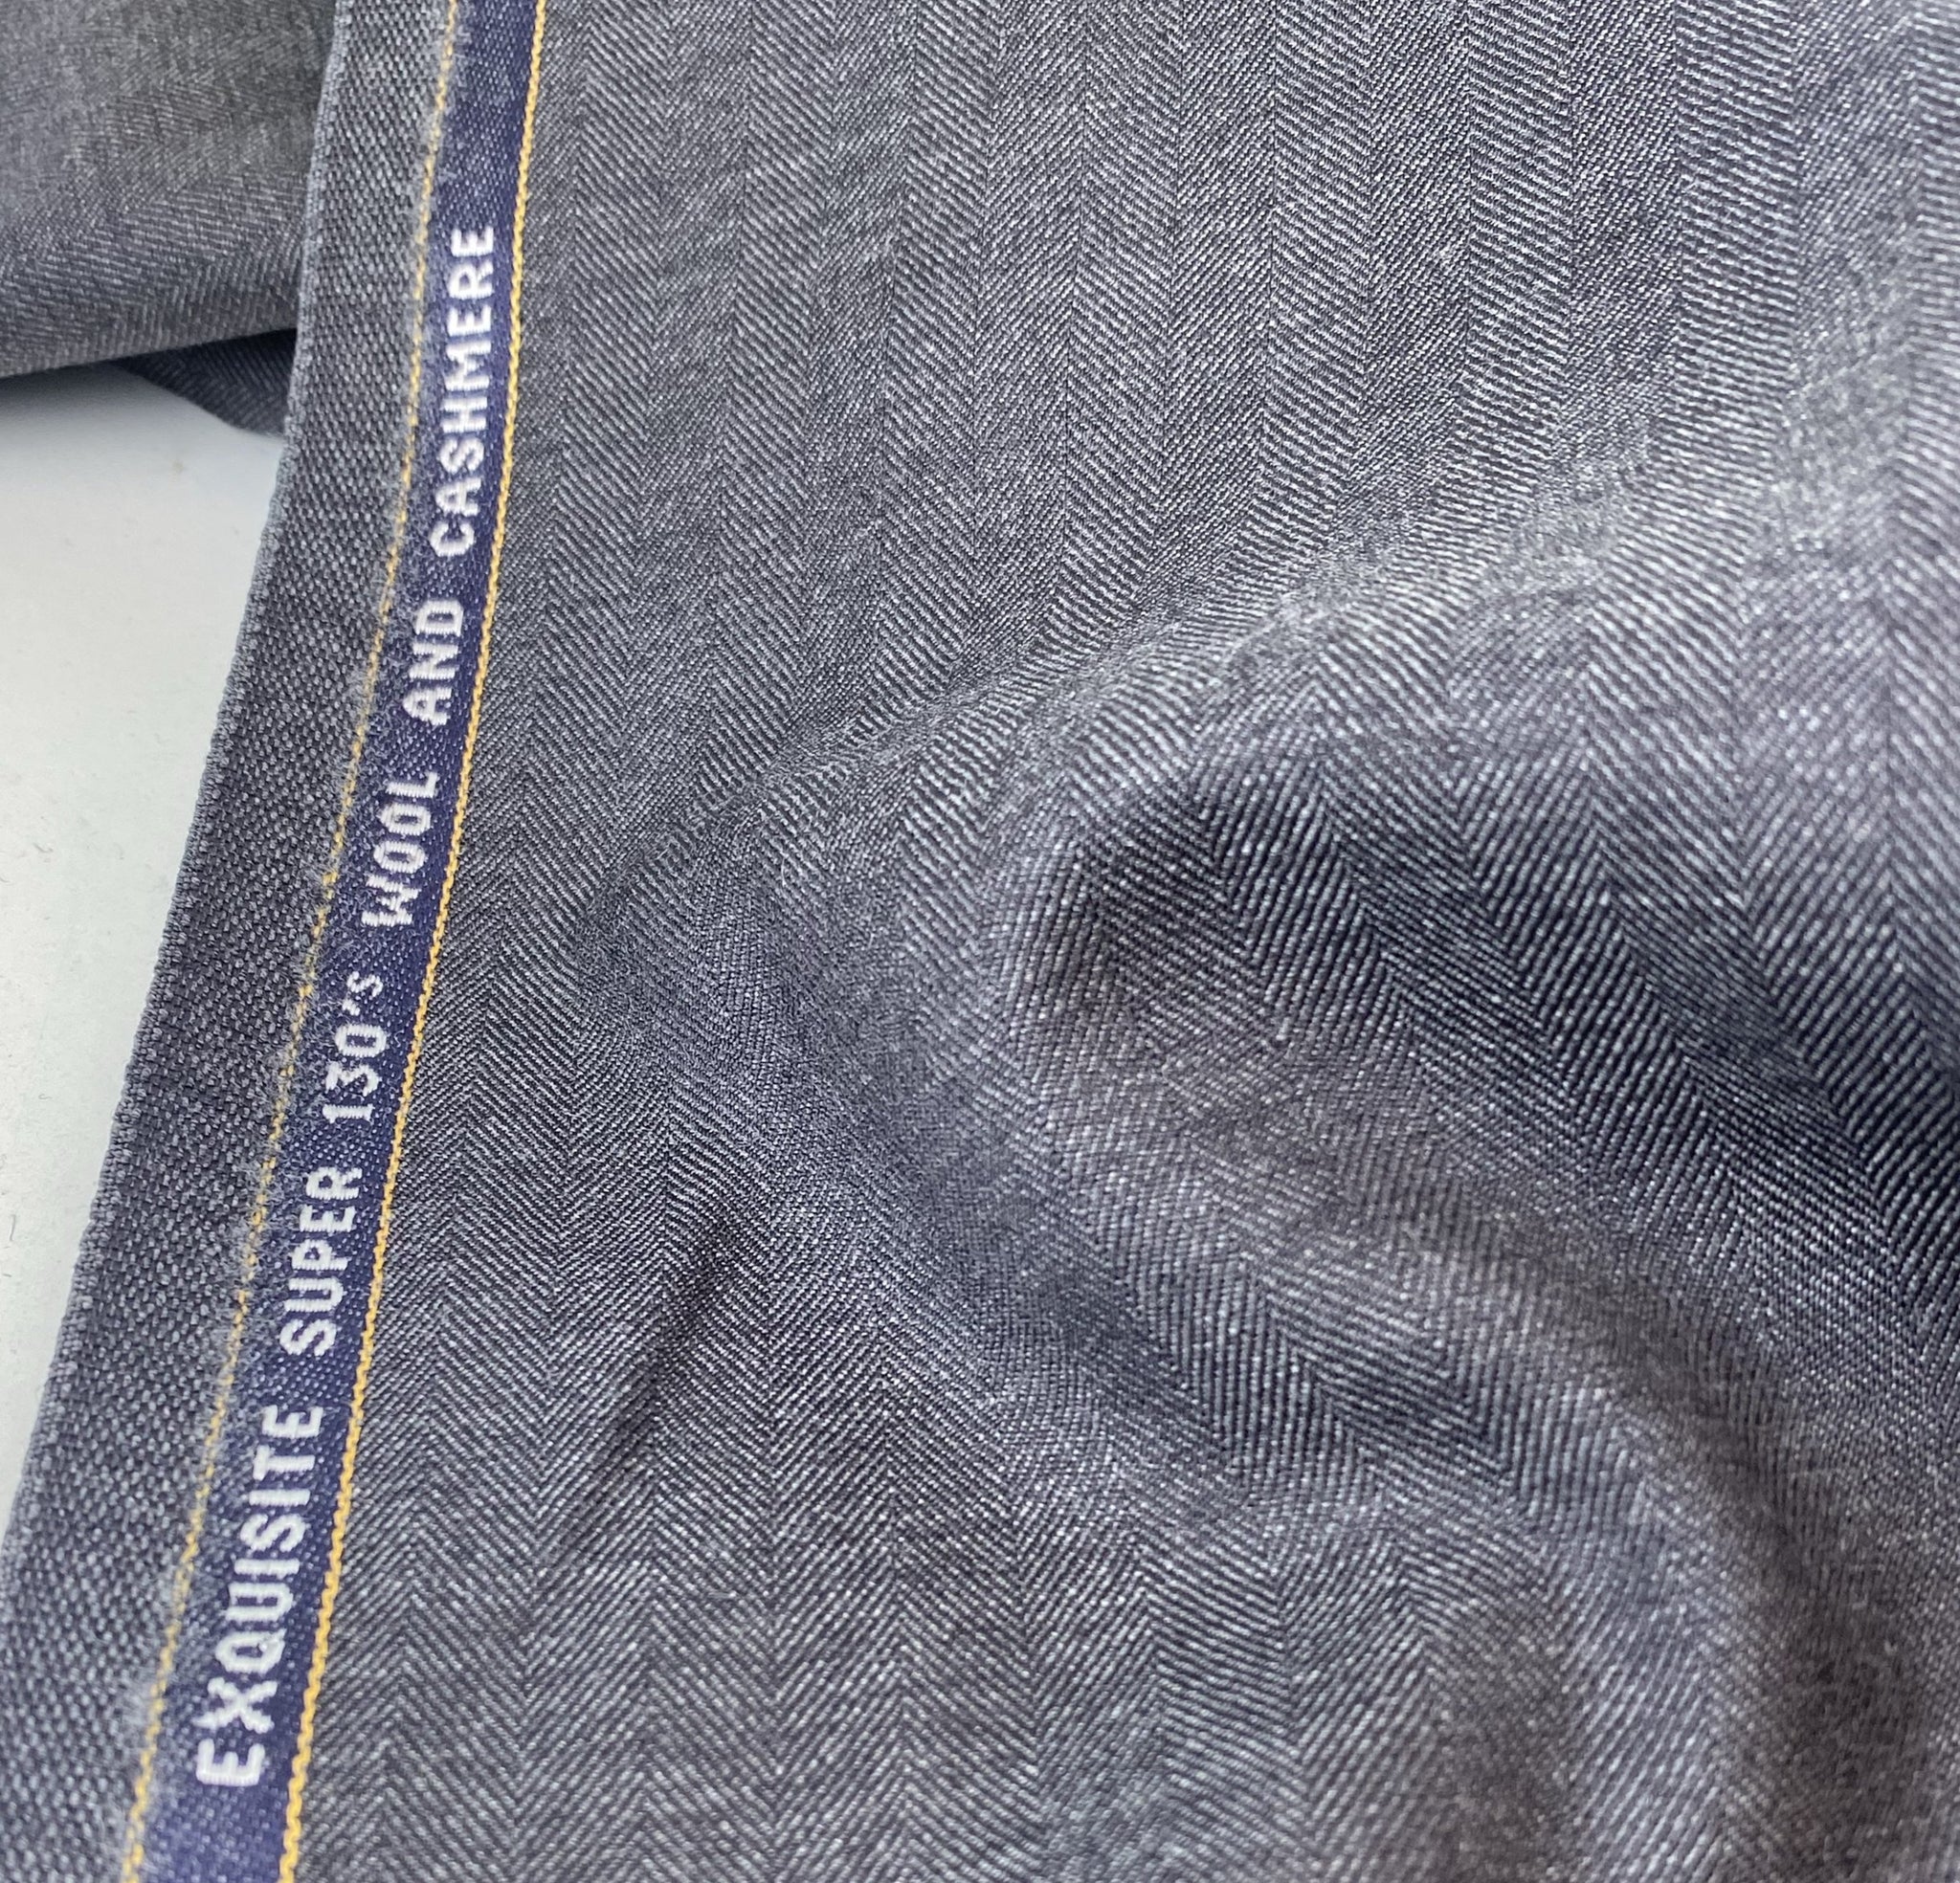 Exquisite Super 130s Wool and Cashmere Mid Grey Herringbone Made in England fabric